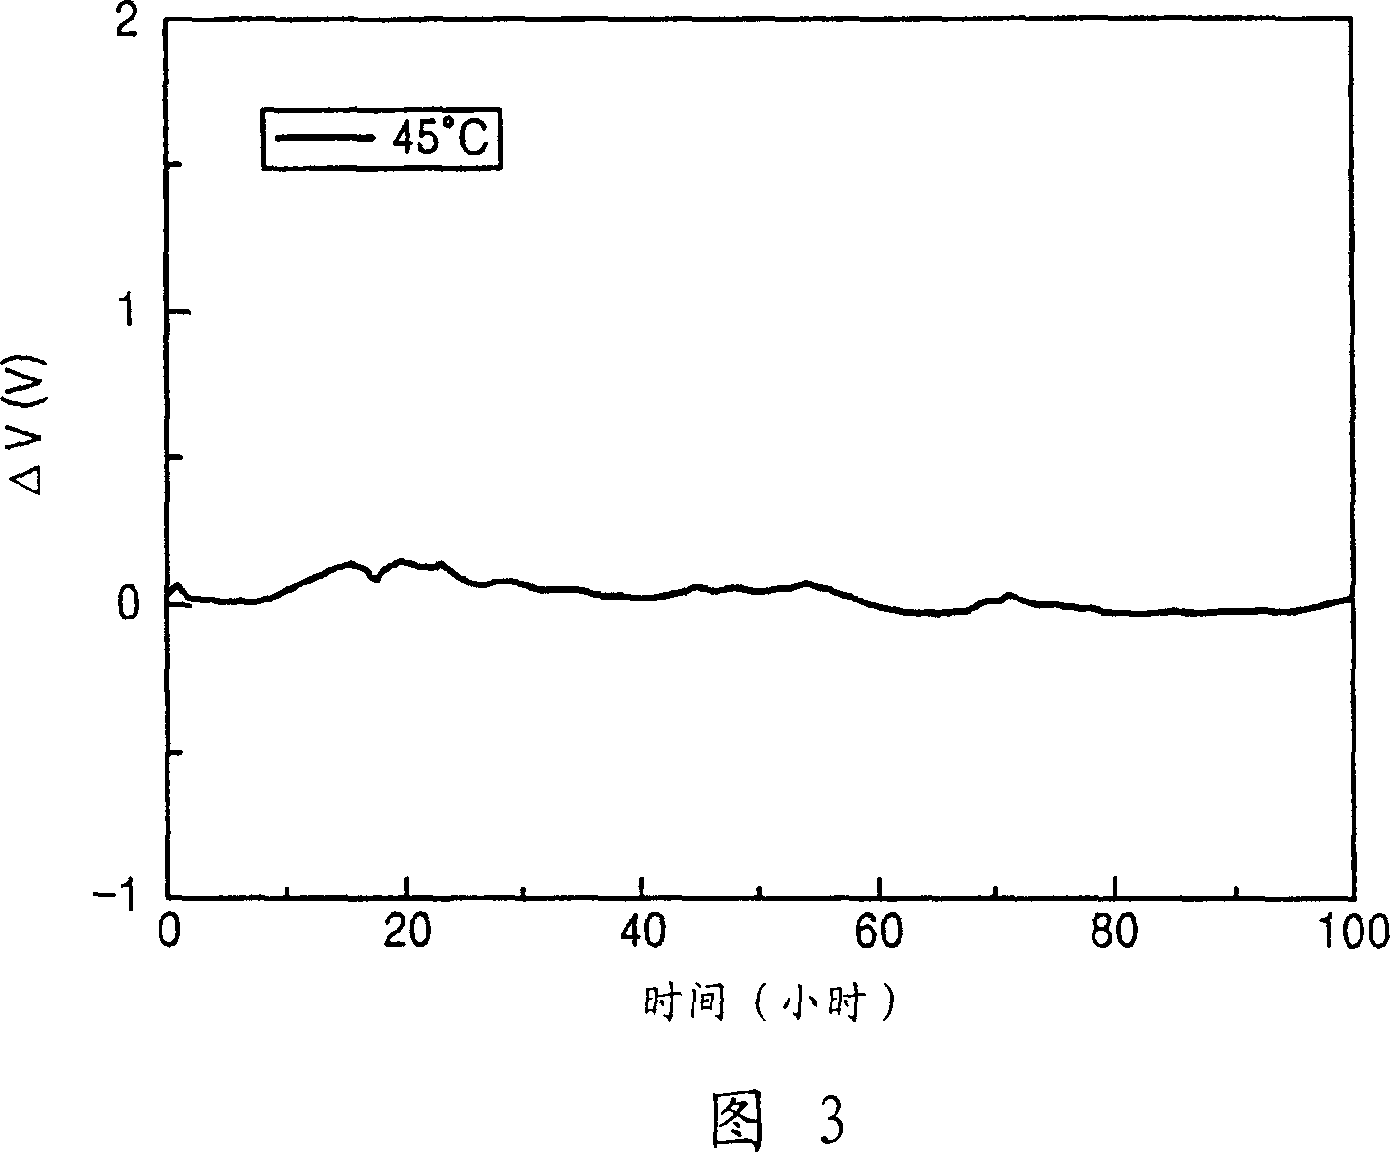 Amorphous zinc oxide thin film transistor and method of manufacturing the same